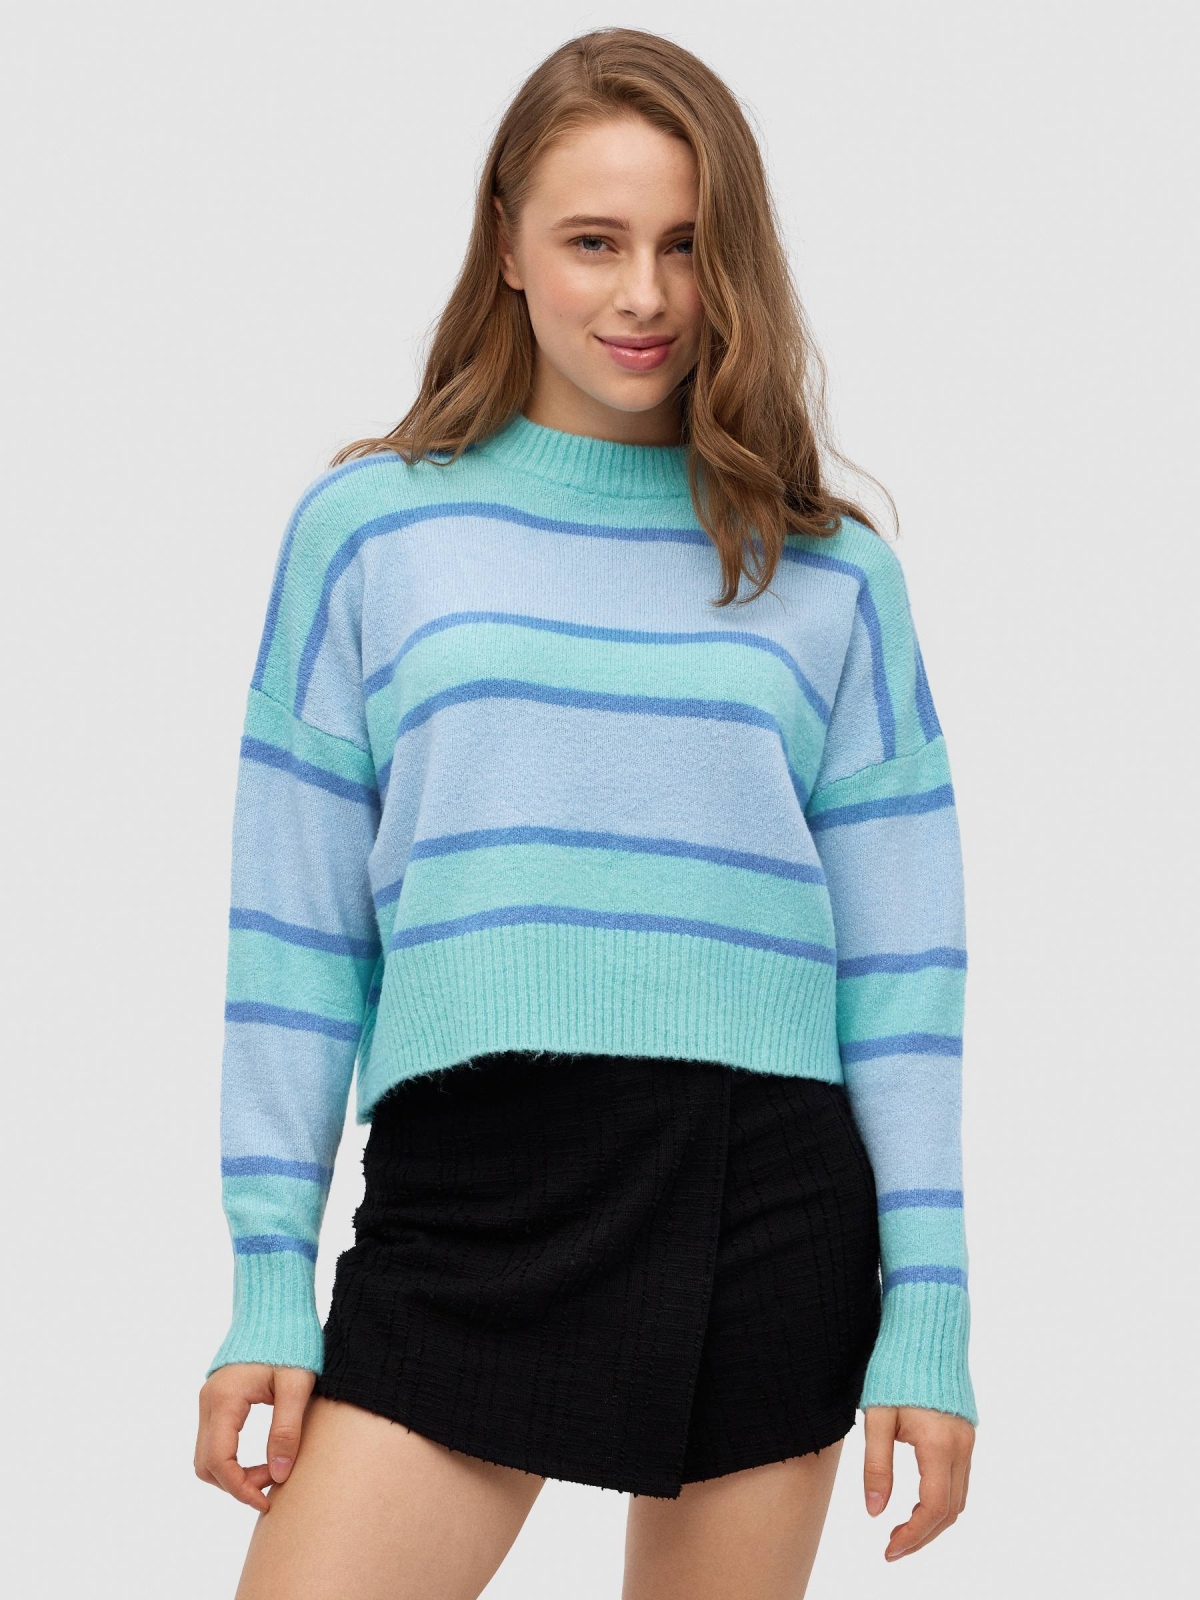 Oversized striped sweater light blue middle front view